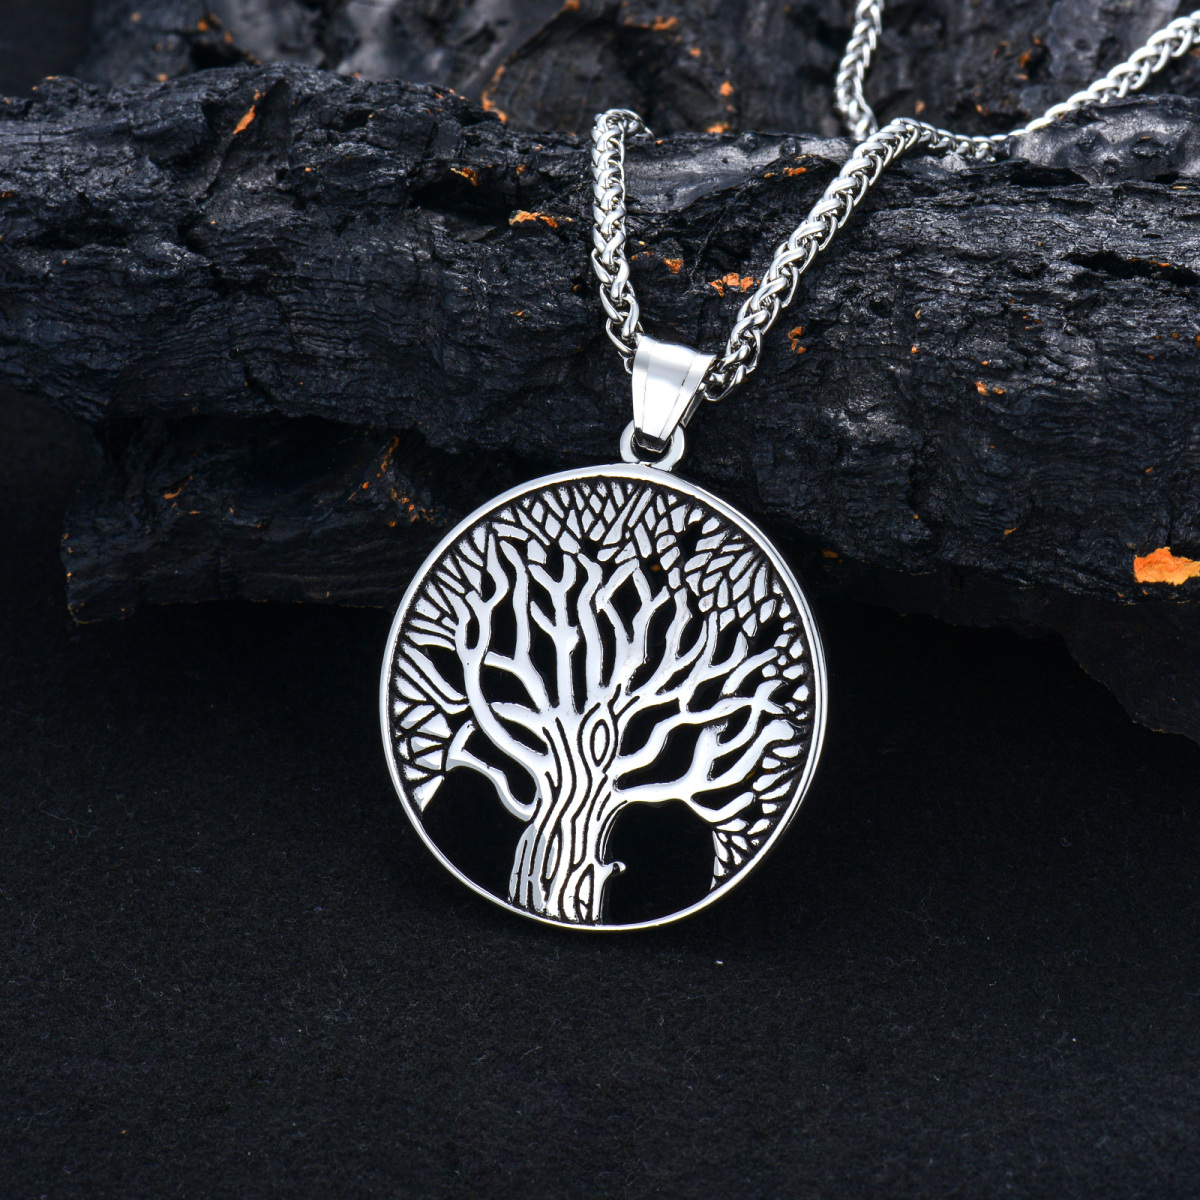 Stainless Steel with Retro Silver Plated Tree Of Life Pendant Necklace for Men-6